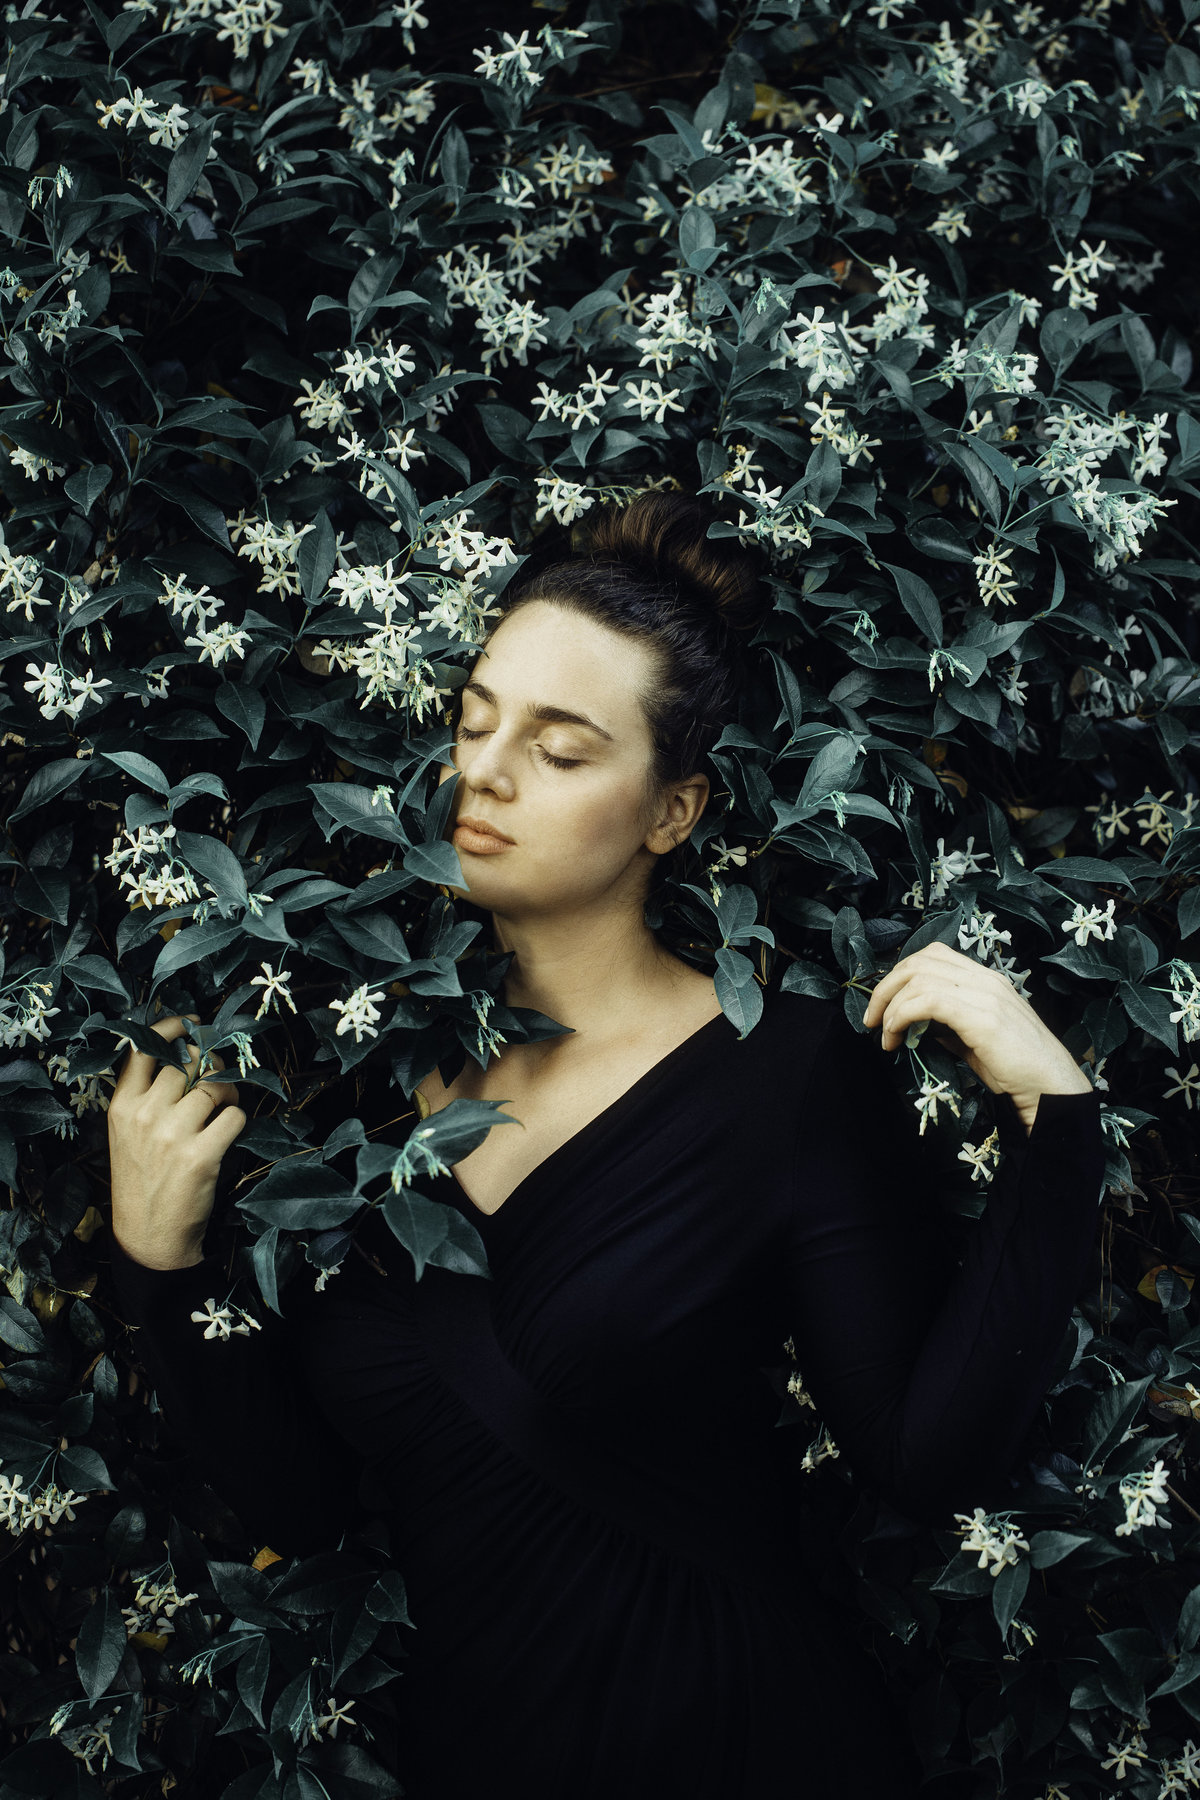 Colorful Photo Portrait Of Woman In Shrubbery